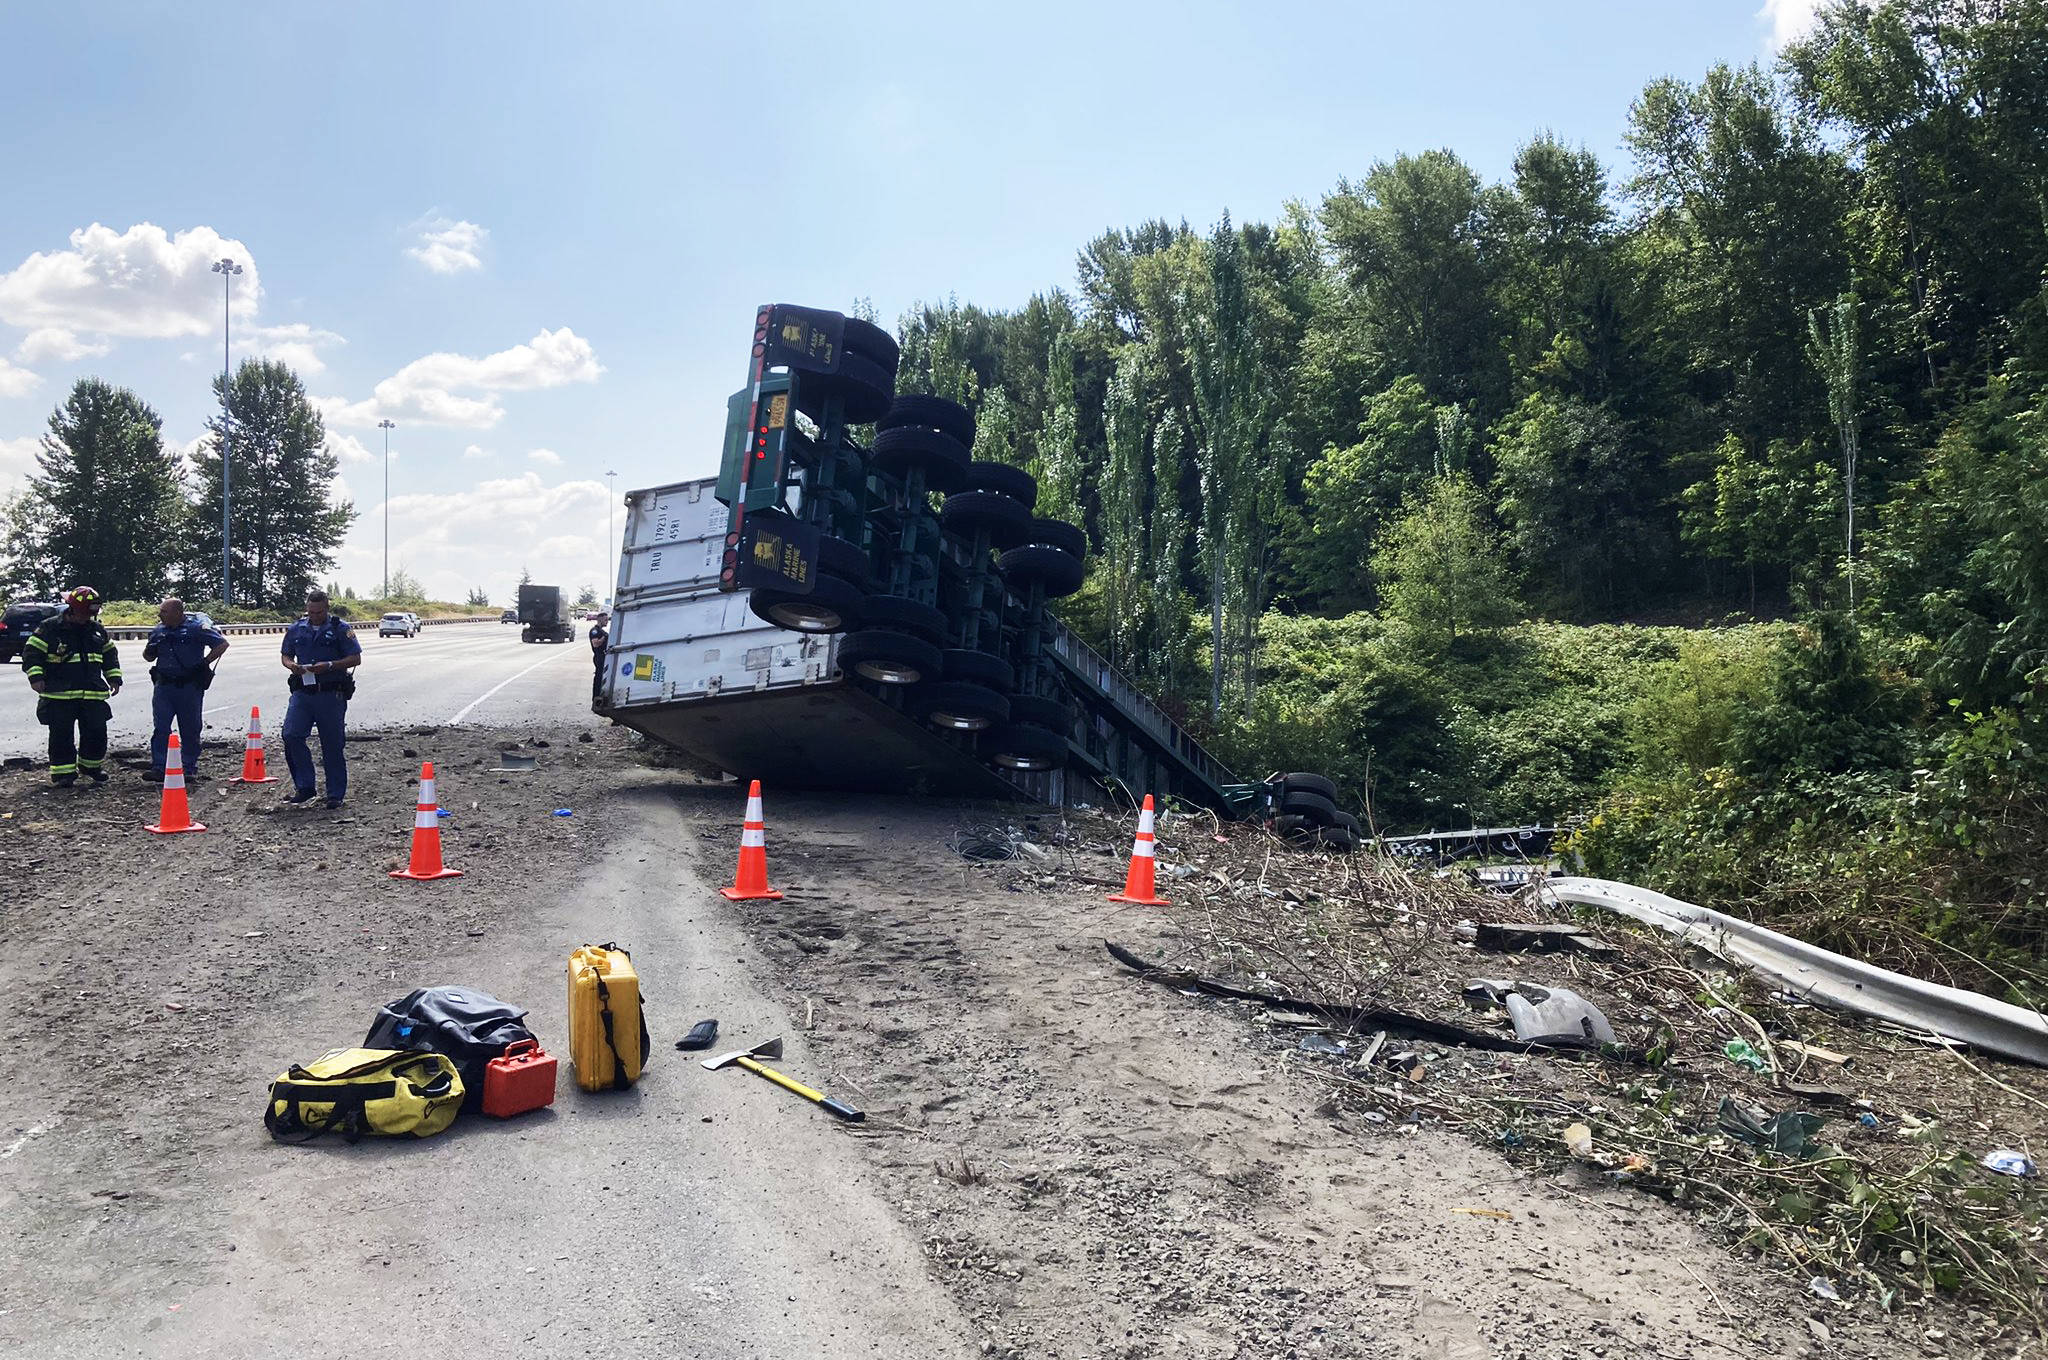 A 64-year-old Kent man died after his semi truck collided with a SUV on Aug. 23 along I-5 in Tukwila. COURTESY PHOTO, Washington State Patrol